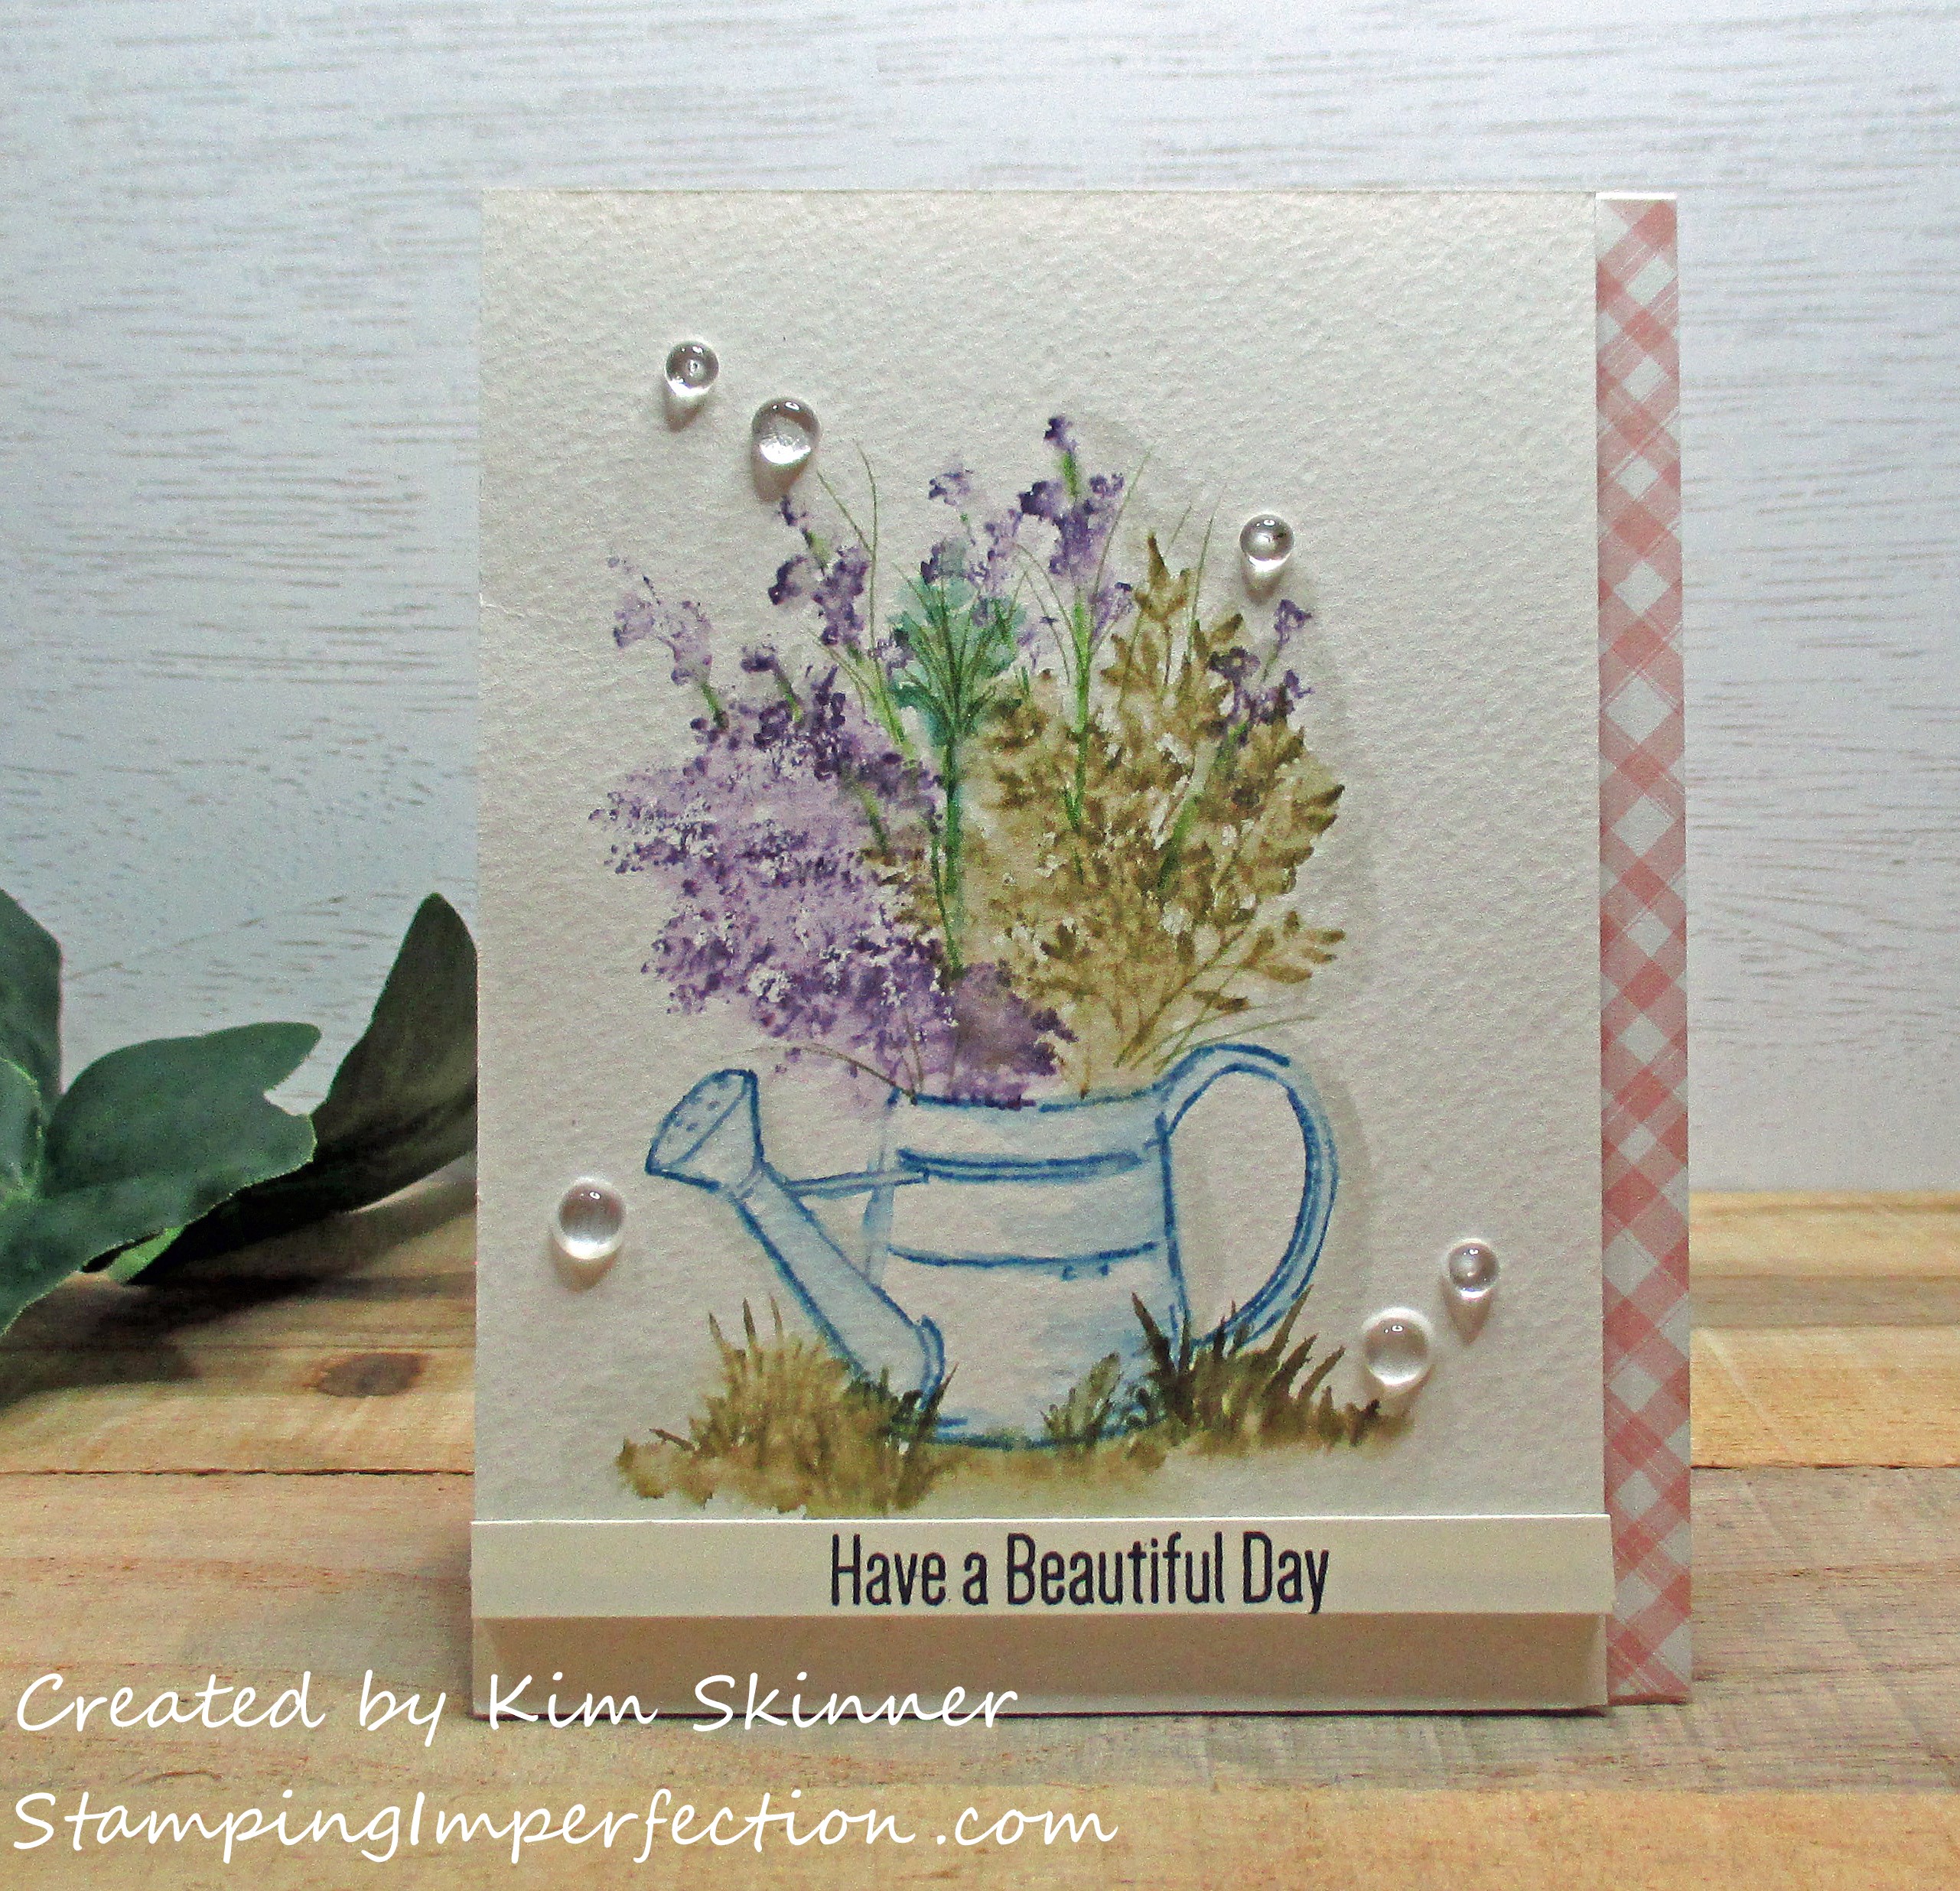 Stamping Imperfection Watercoloring with Art Impressions